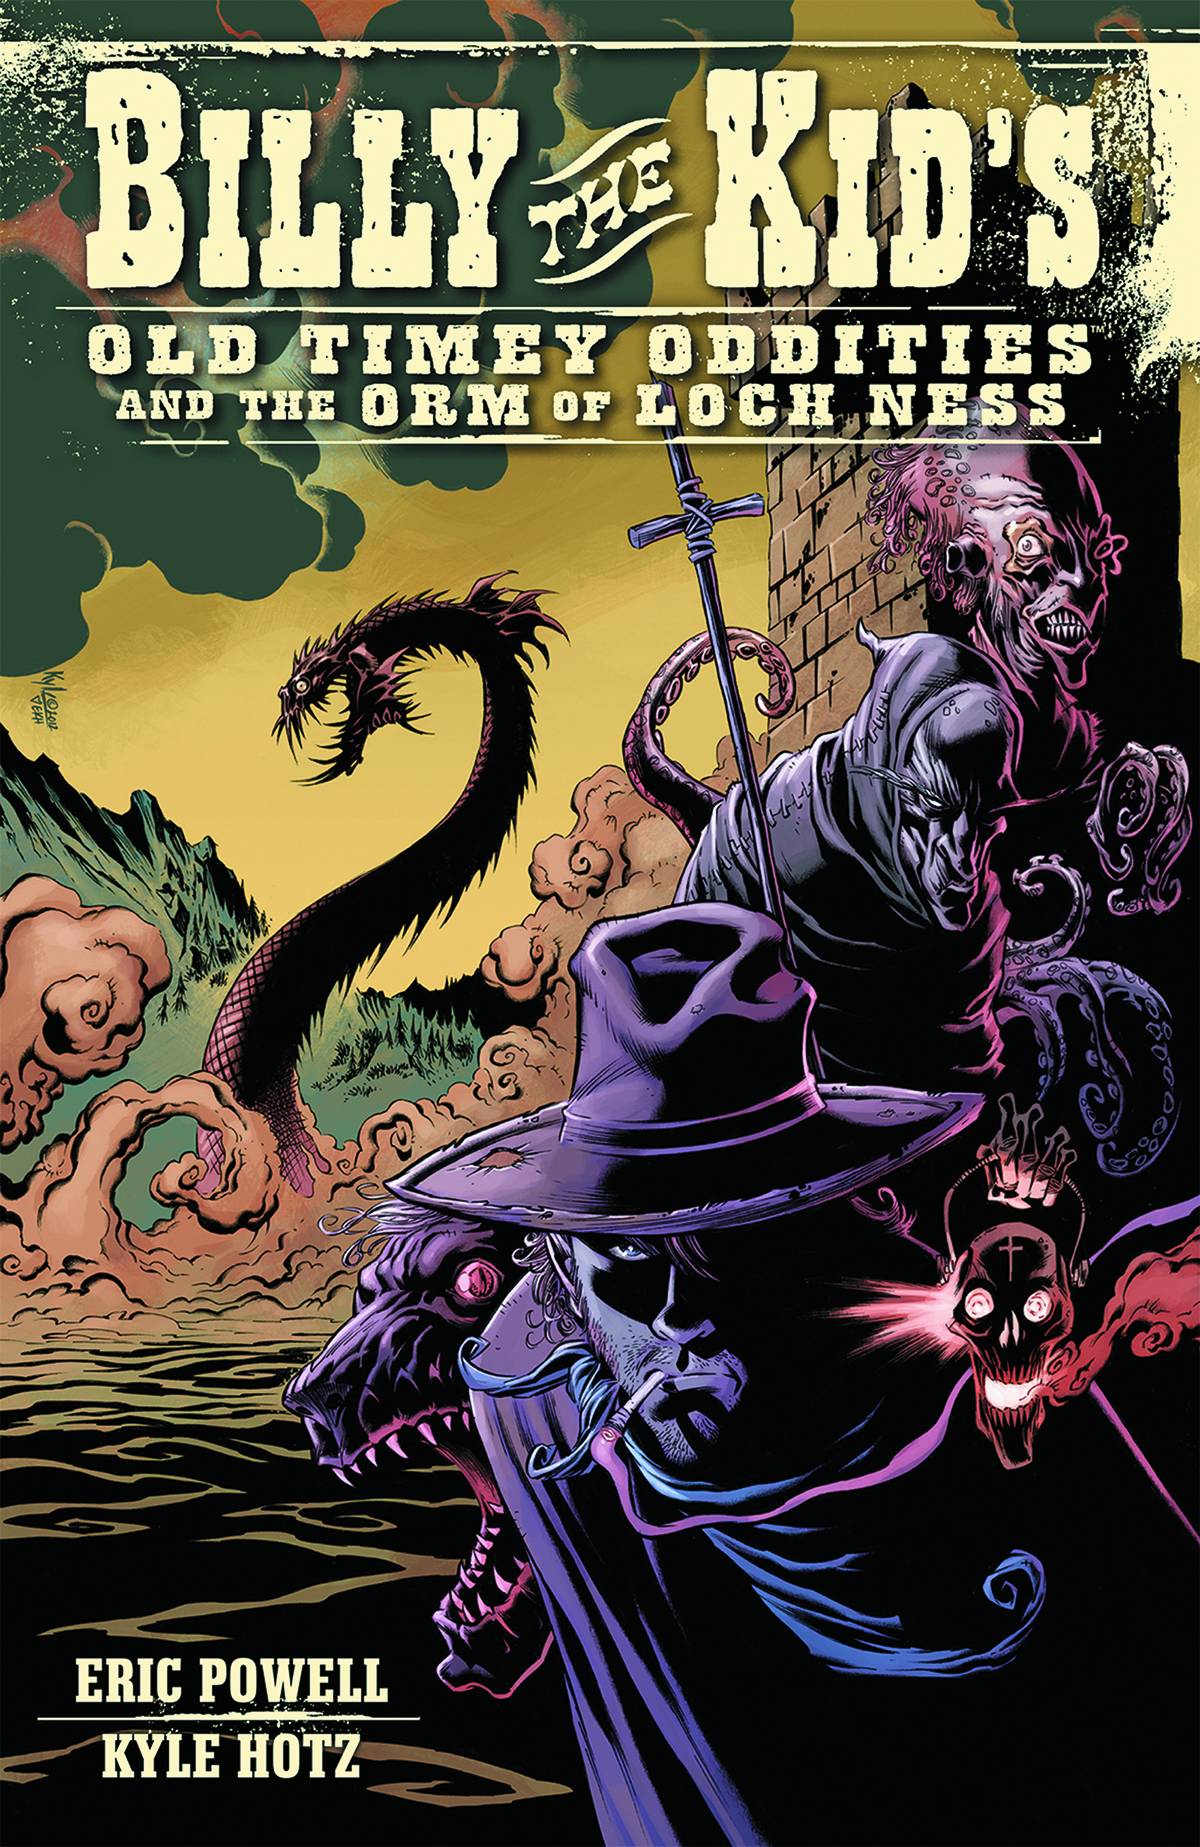 Billy the Kid Old Timey Oddities Graphic Novel Volume 3 Orm of Loch Ness